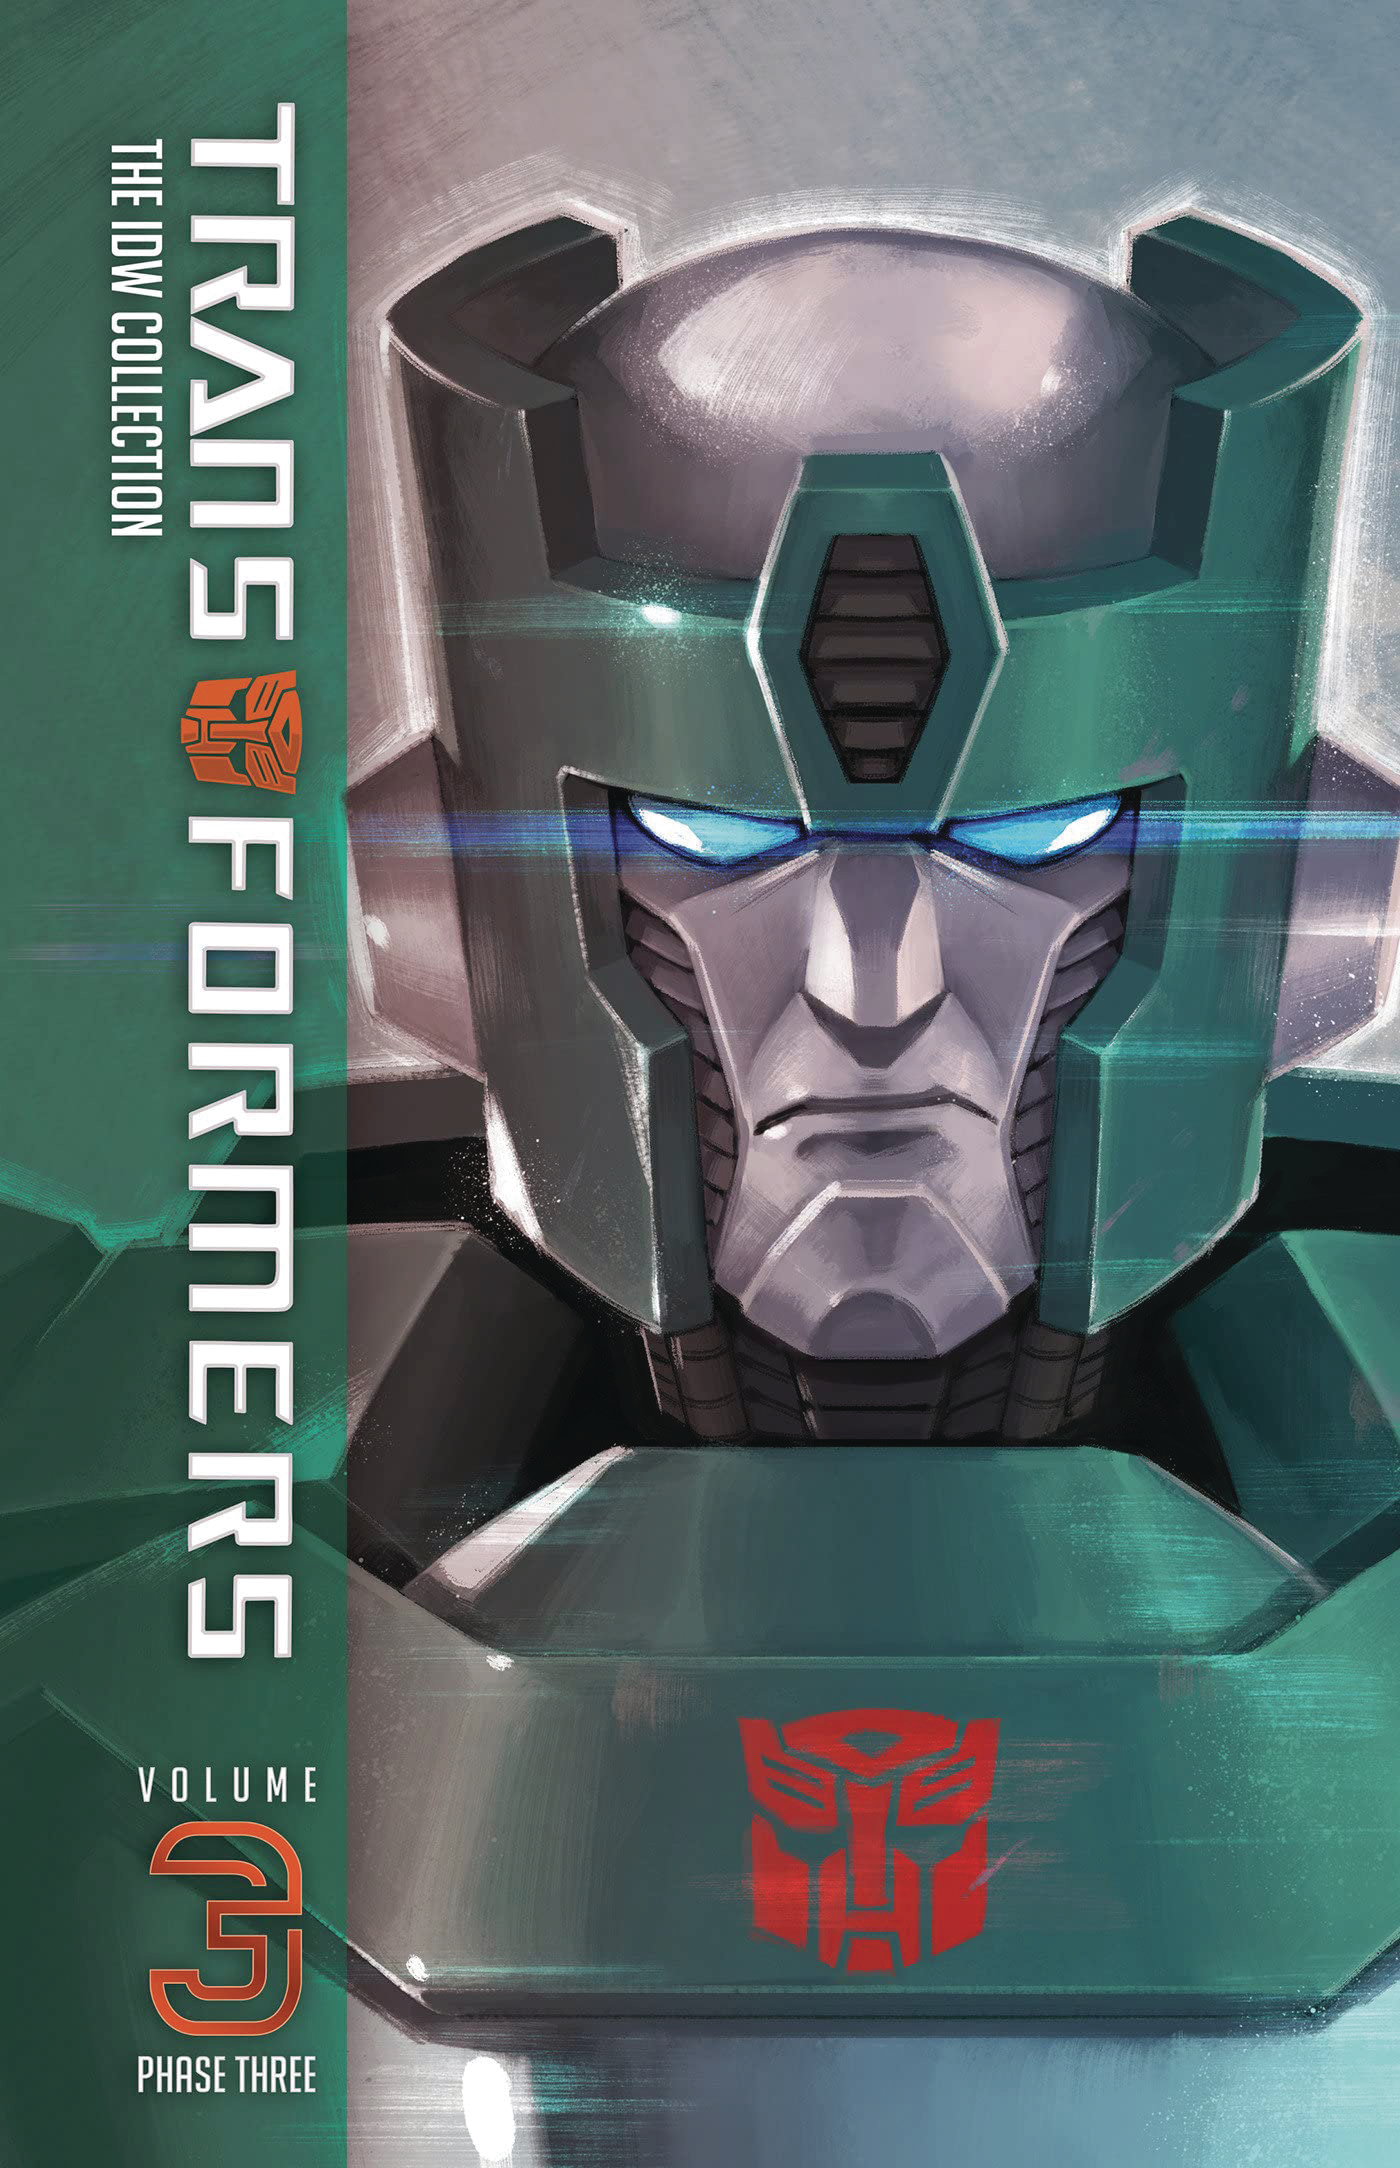 Transformers IDW Collection Phase Three Hardcover Volume 3